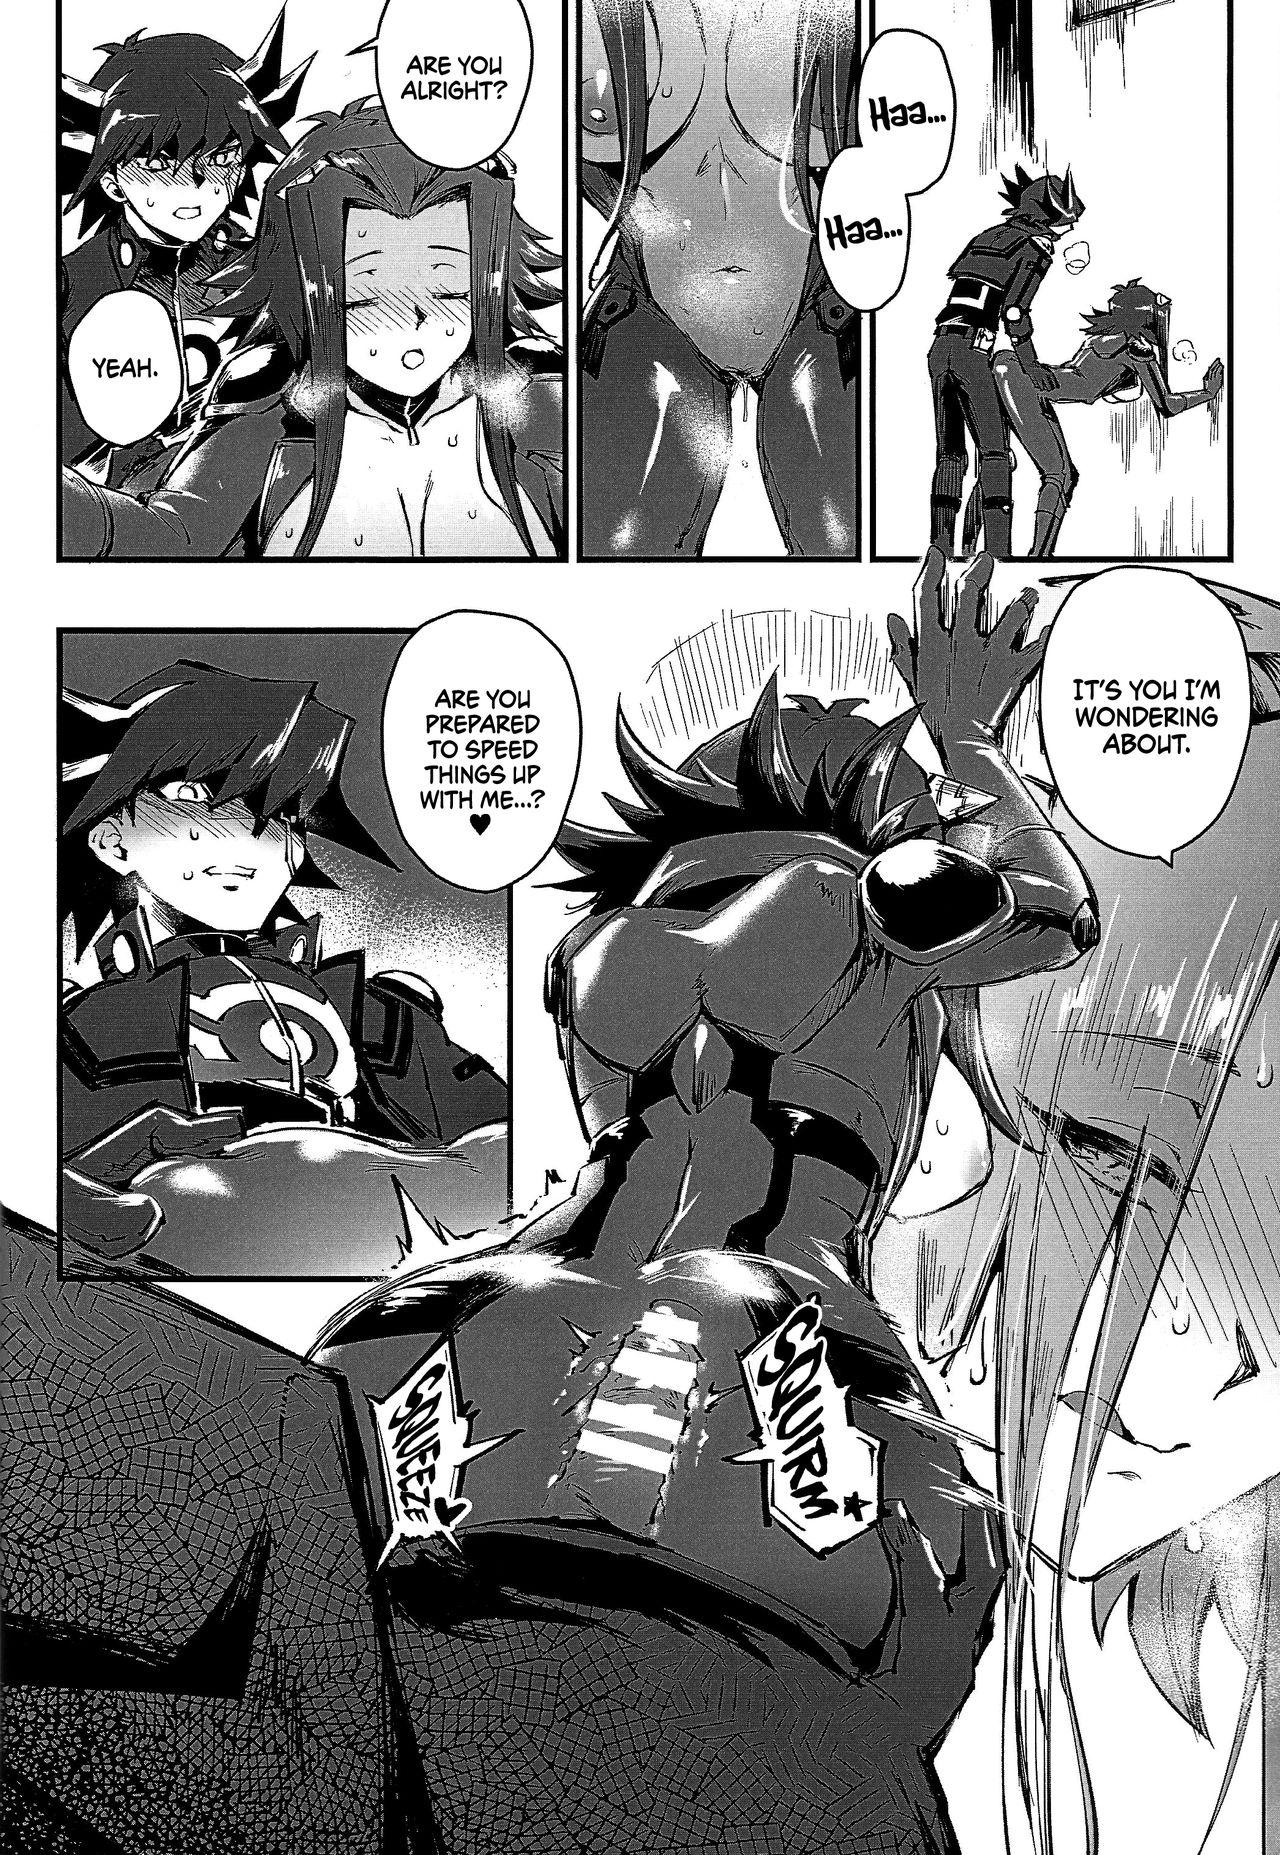 Cams MASK of D. - Yu-gi-oh 5ds Long Hair - Page 9